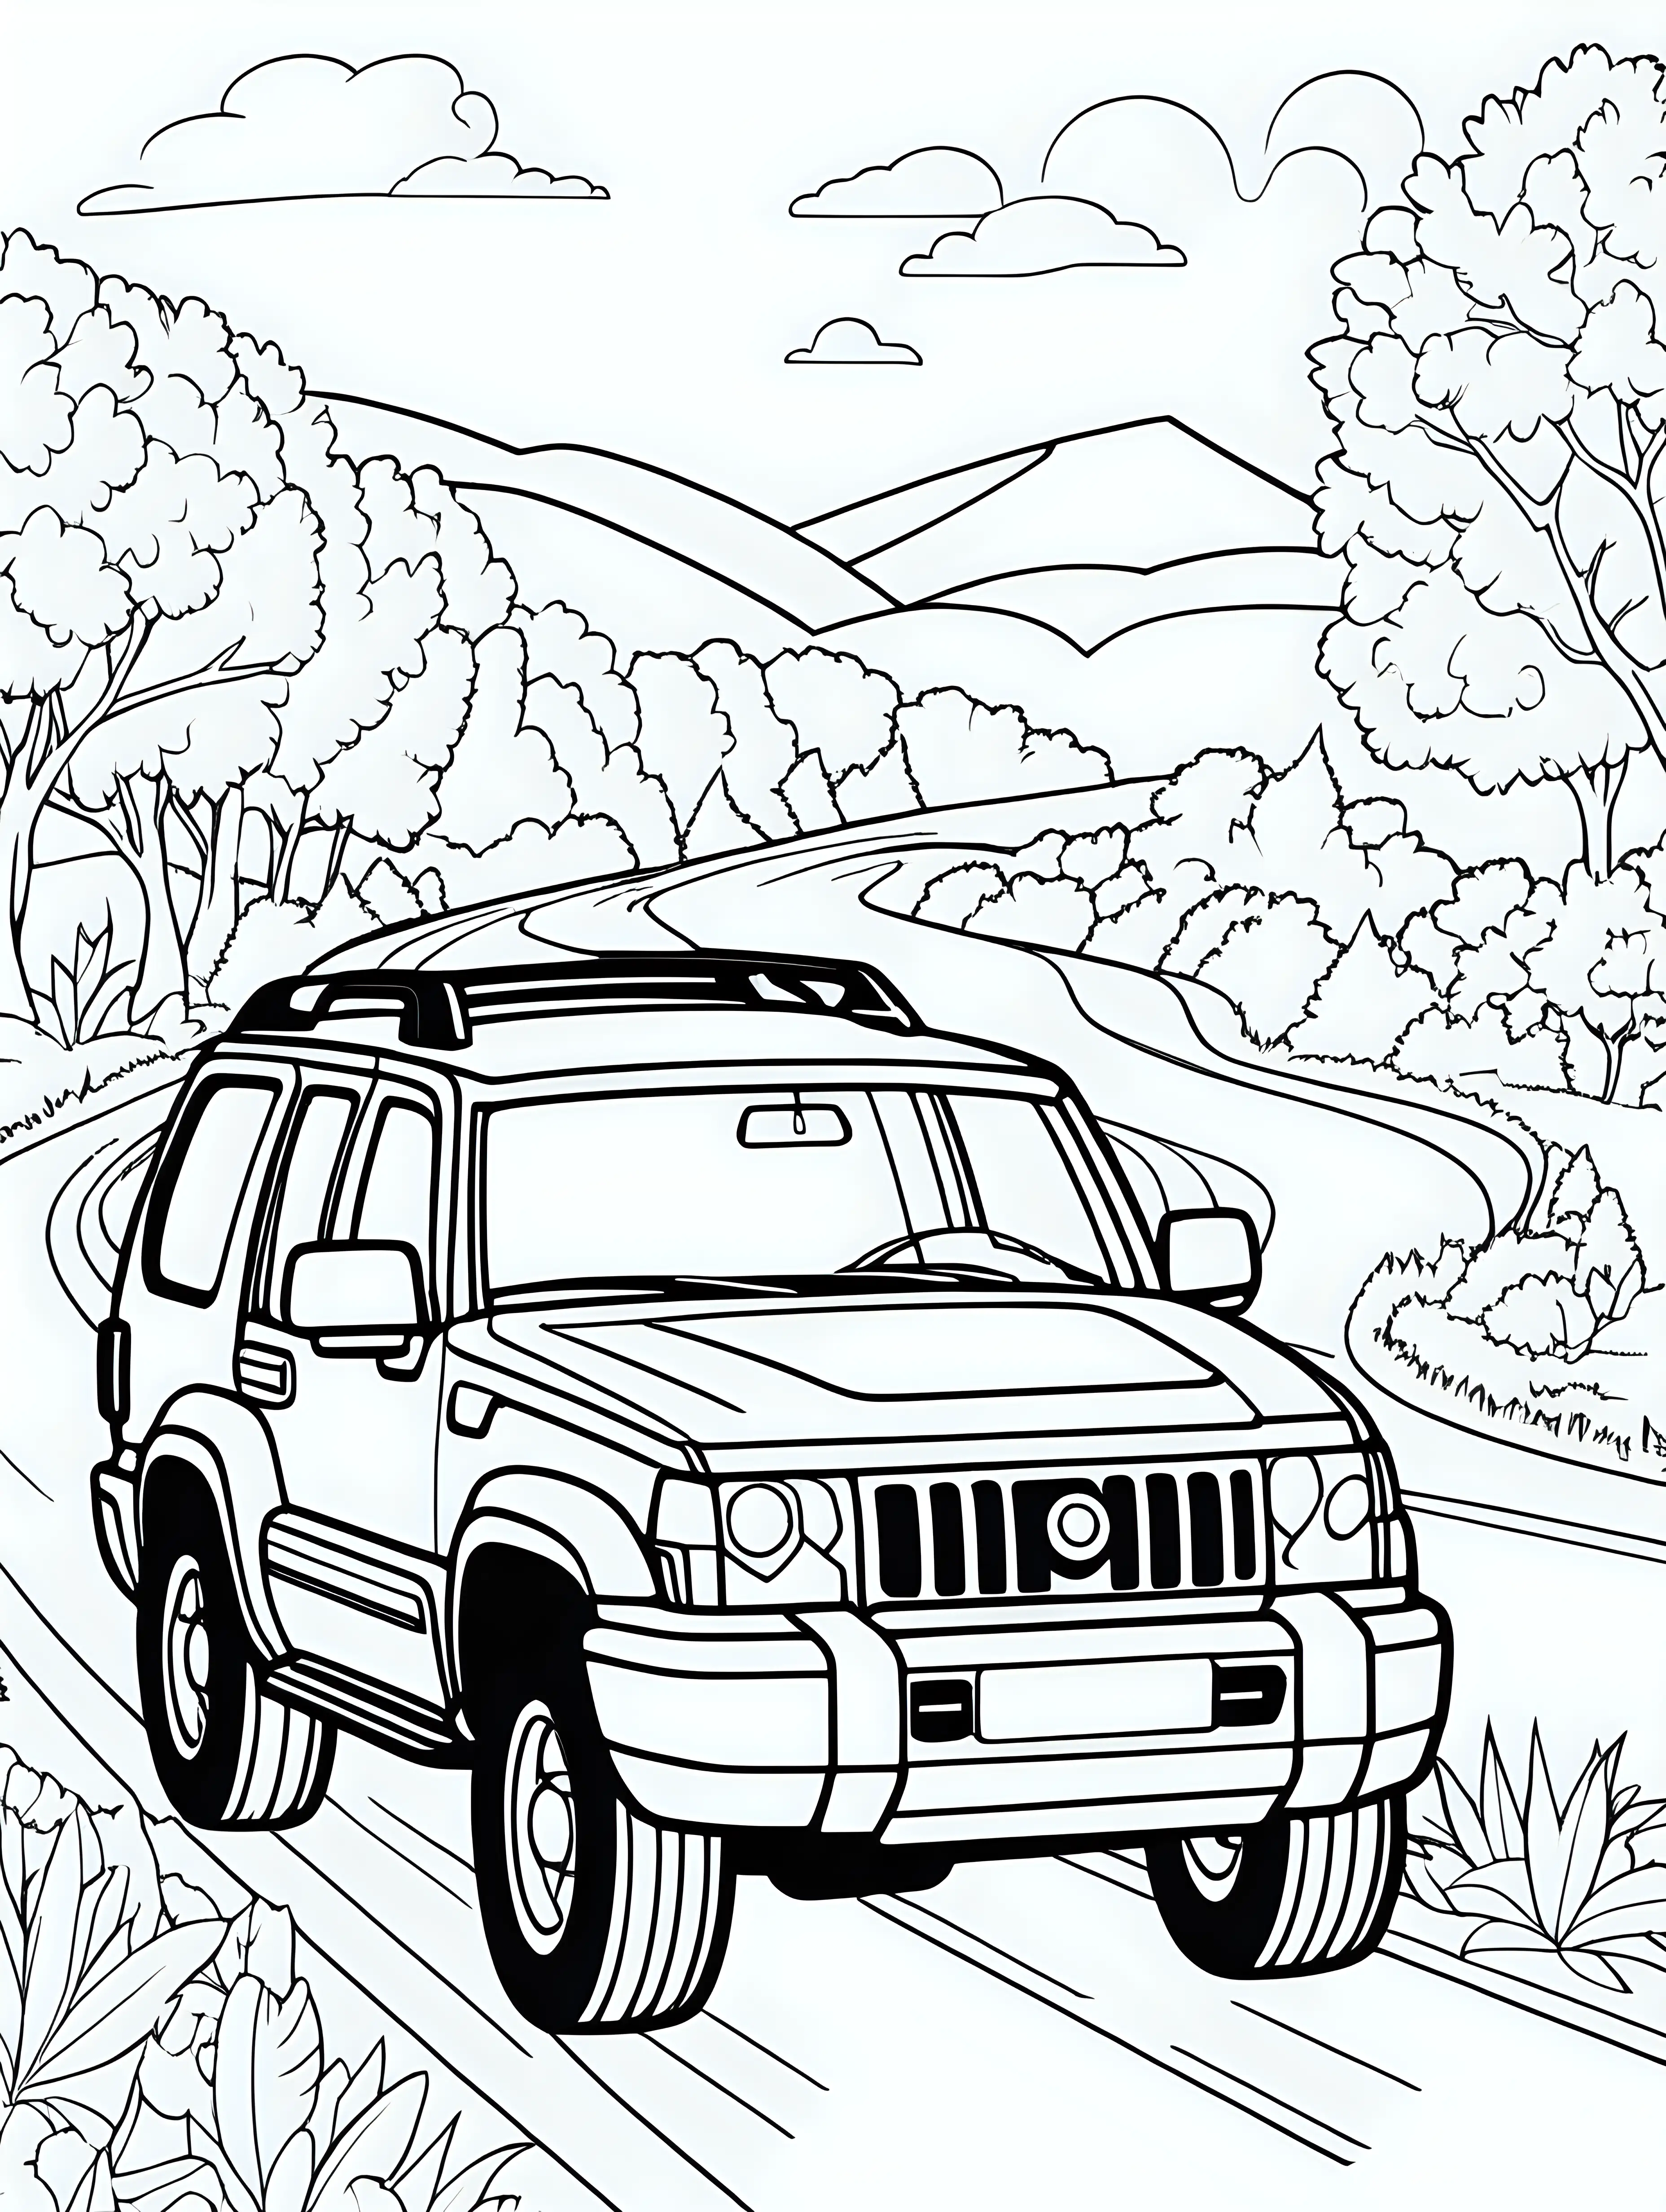 Coloring page for kids, suv car, the car is on the road, black lines white pages